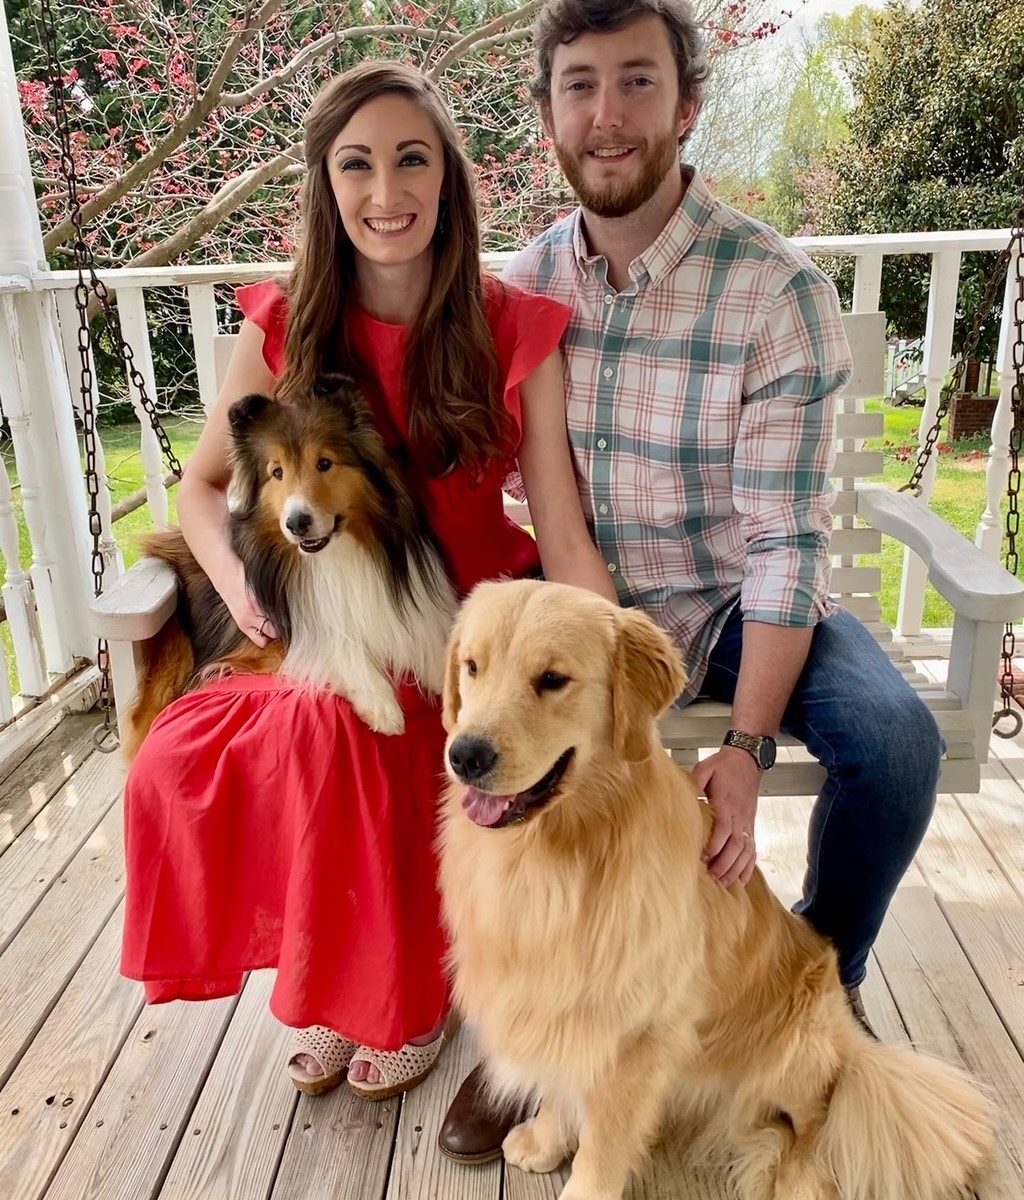 Taylor, her husband and two dogs sitting on a swing on a porch